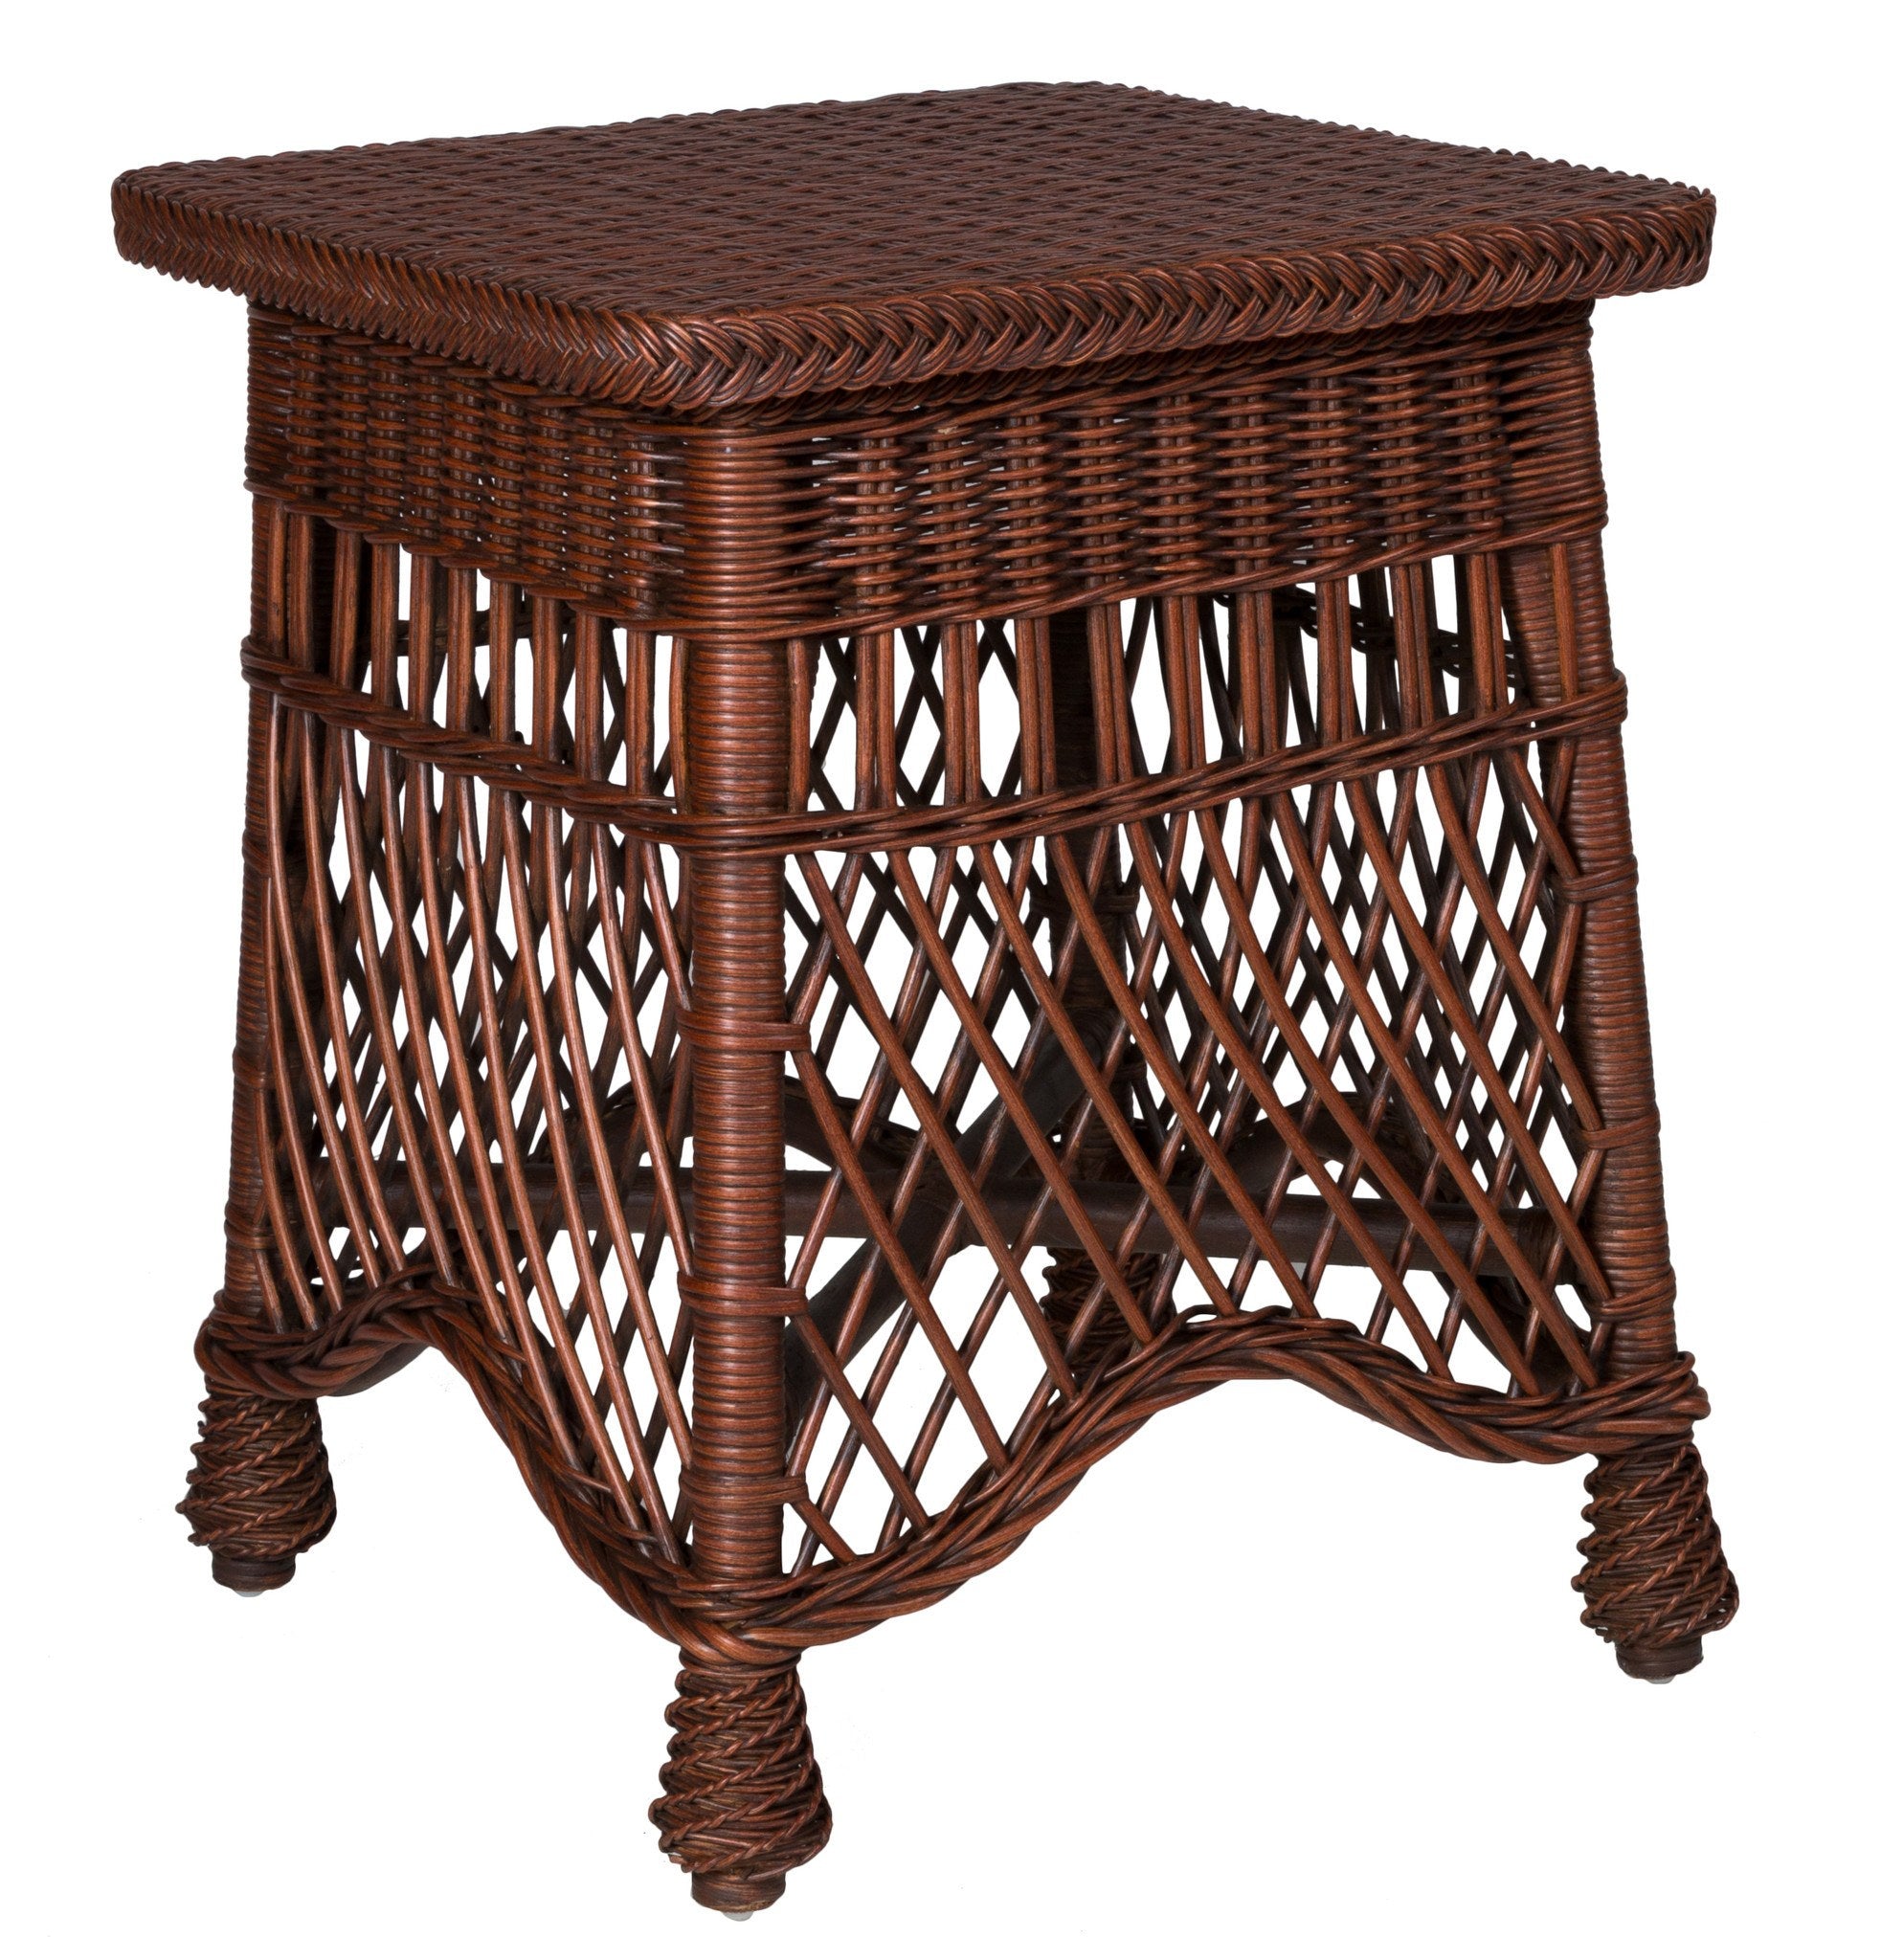 Designer Wicker & Rattan By Tribor Naples End Table by Designer Wicker from Tribor End Table - Rattan Imports